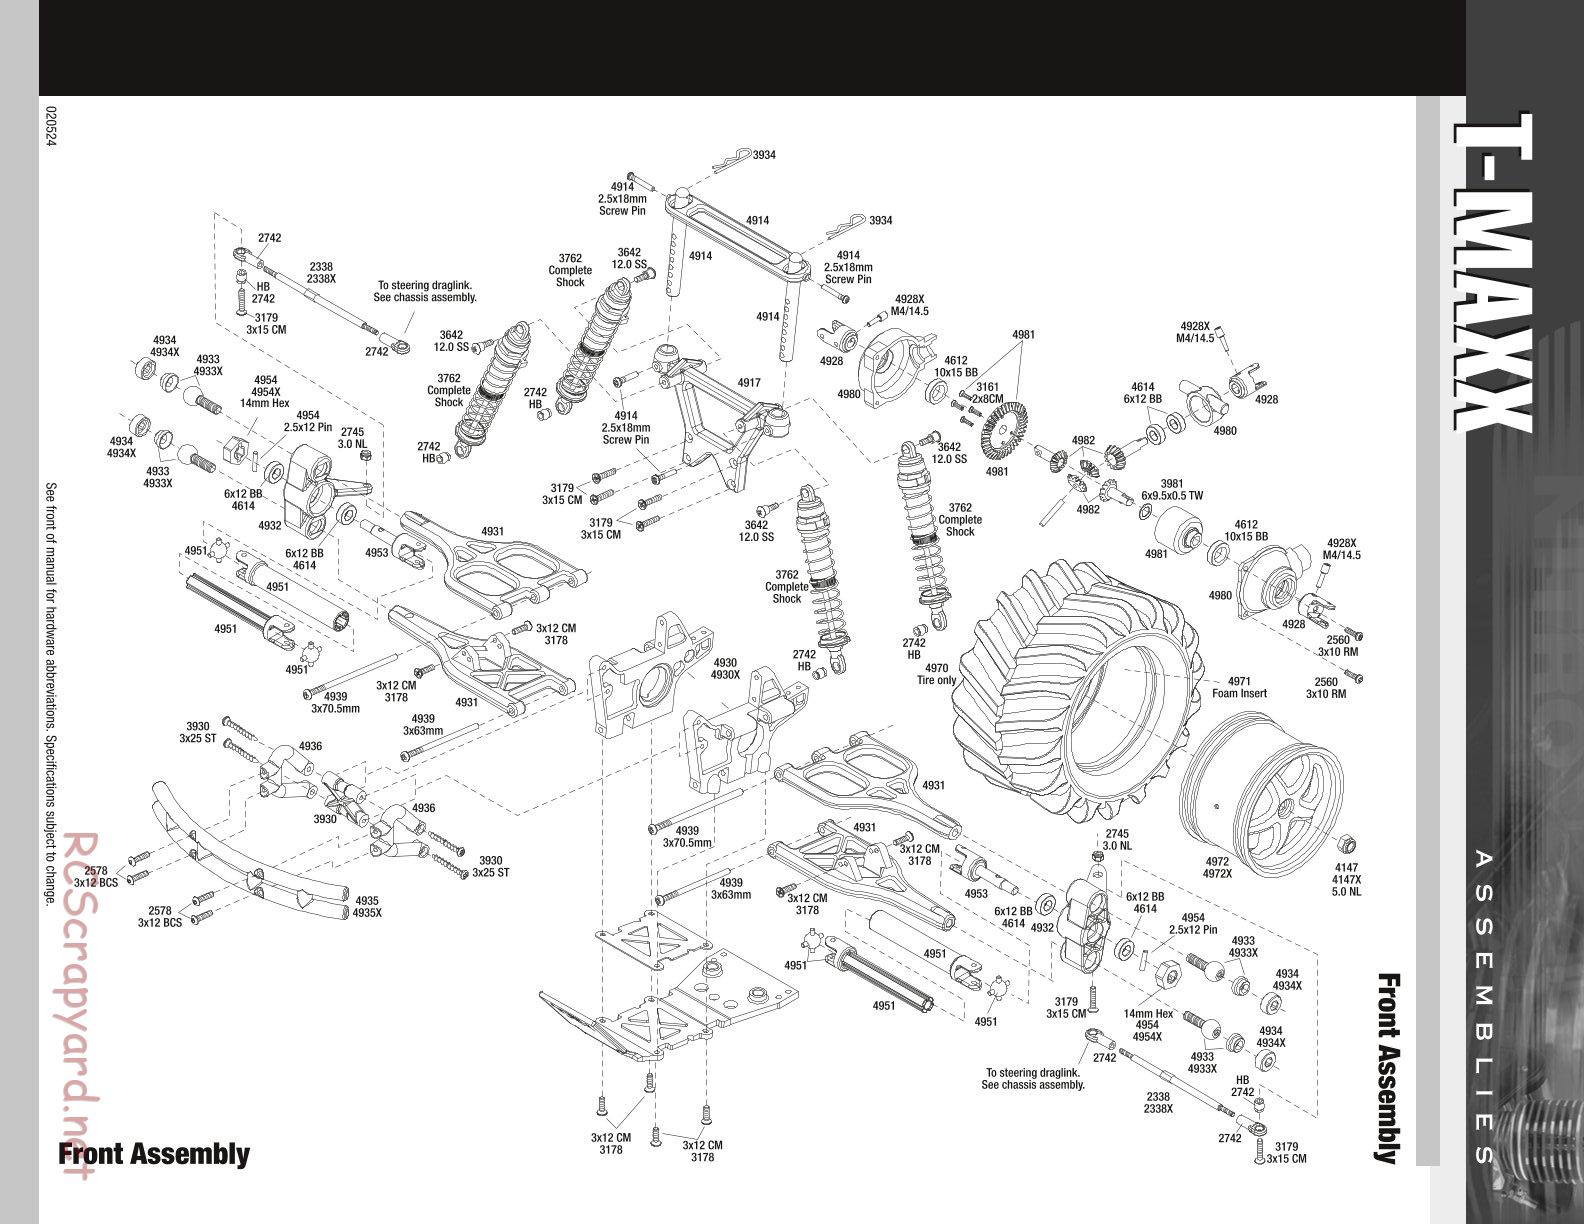 Traxxas - T-Maxx (2000) - Exploded Views - Page 3